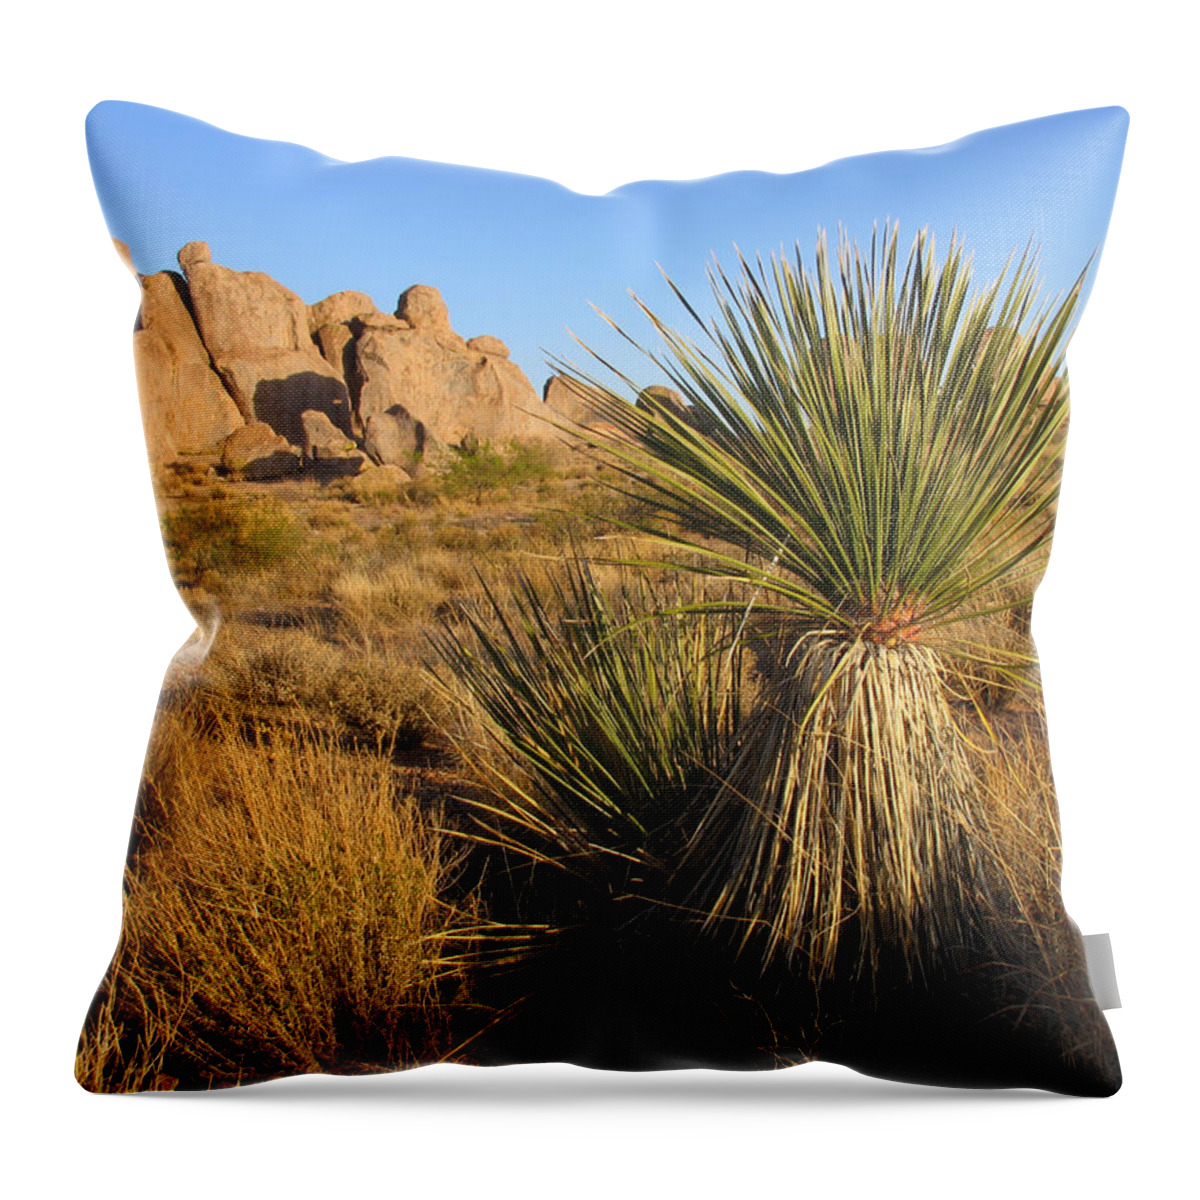 Scenics Throw Pillow featuring the photograph Southwestern Scene by Duckycards